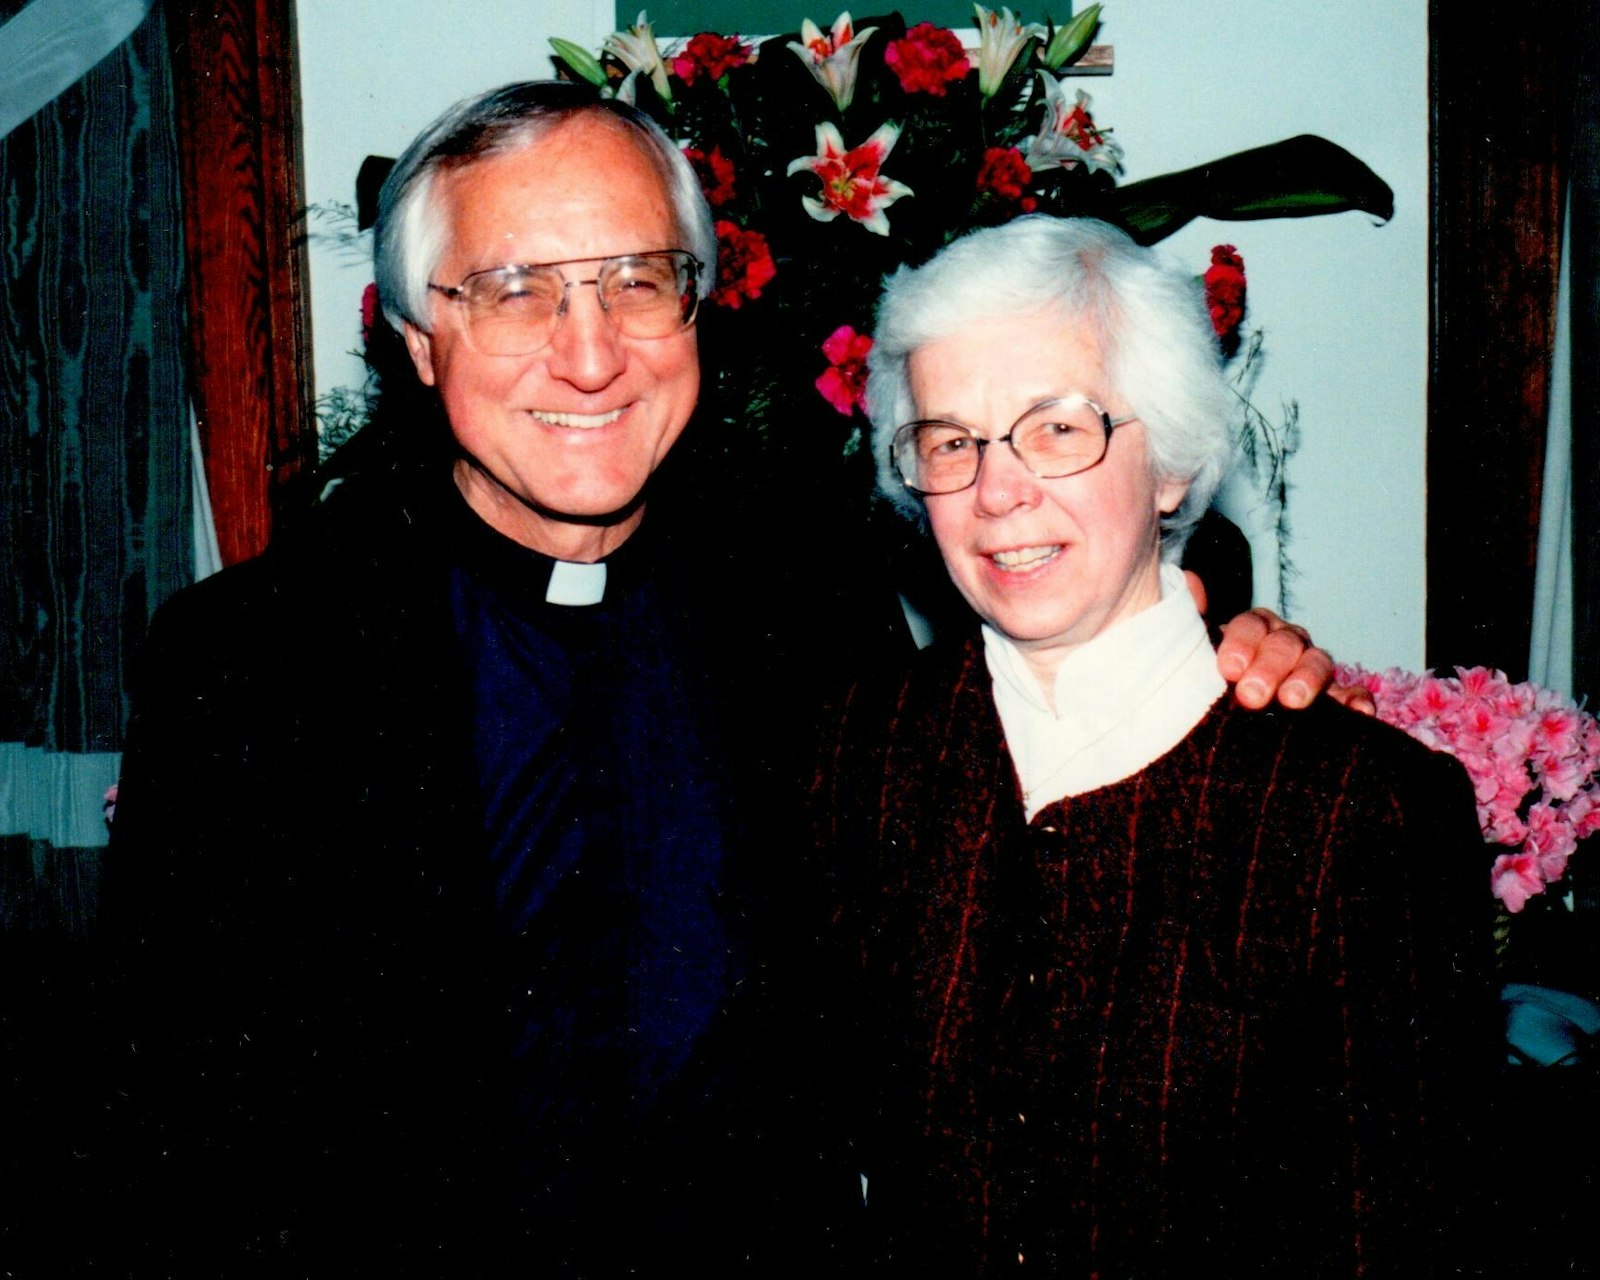 Bishop Gumbleton is pictured with his sister, Sr. Irene Gumbleton, IHM. Several members of the Gumbleton family went on to serve the Church, including several of his siblings, aunts and cousins. (File photo)